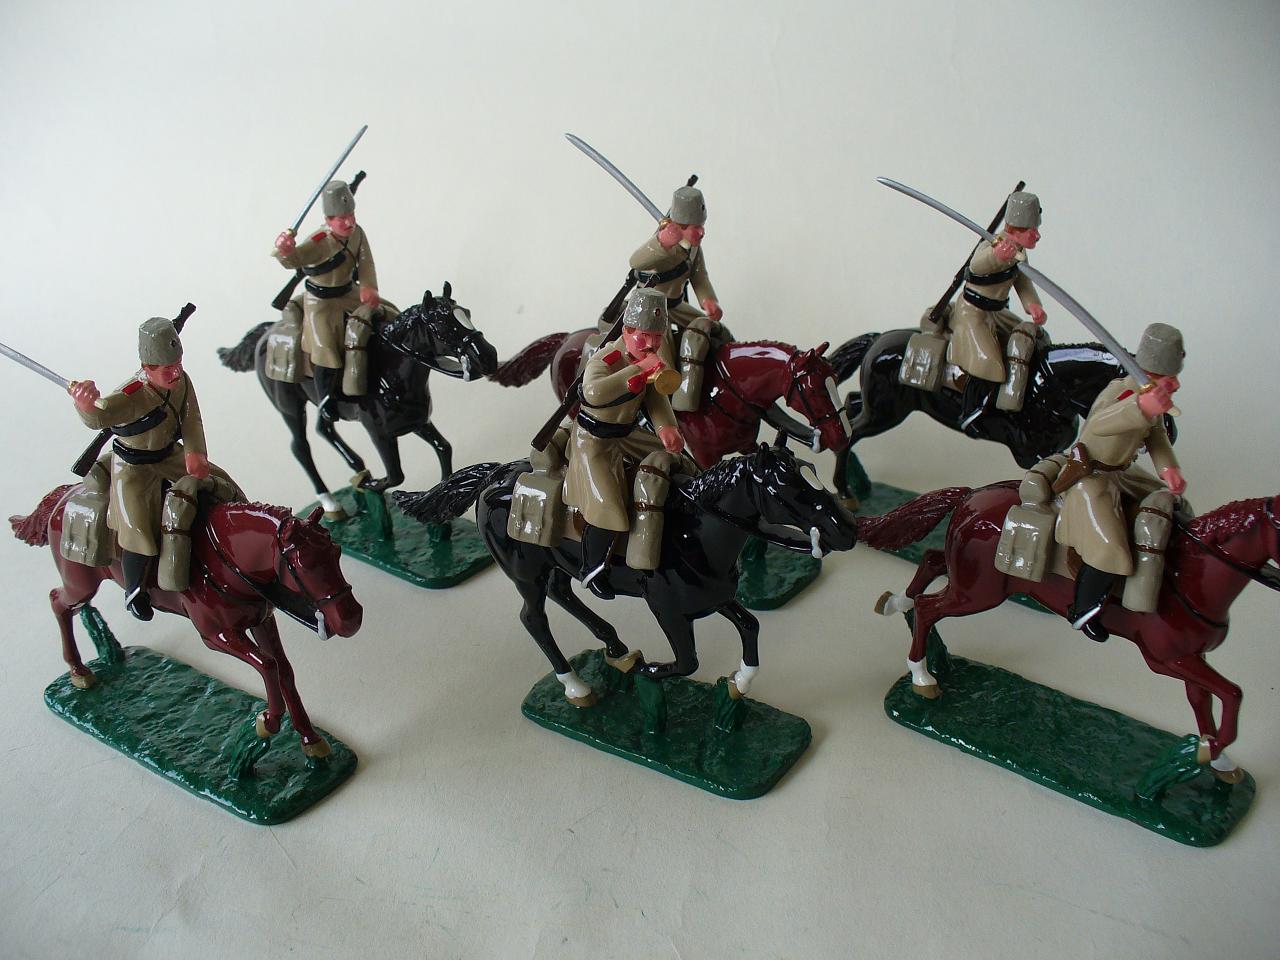 Russian Cossacks | Regal toy soldiers Blog